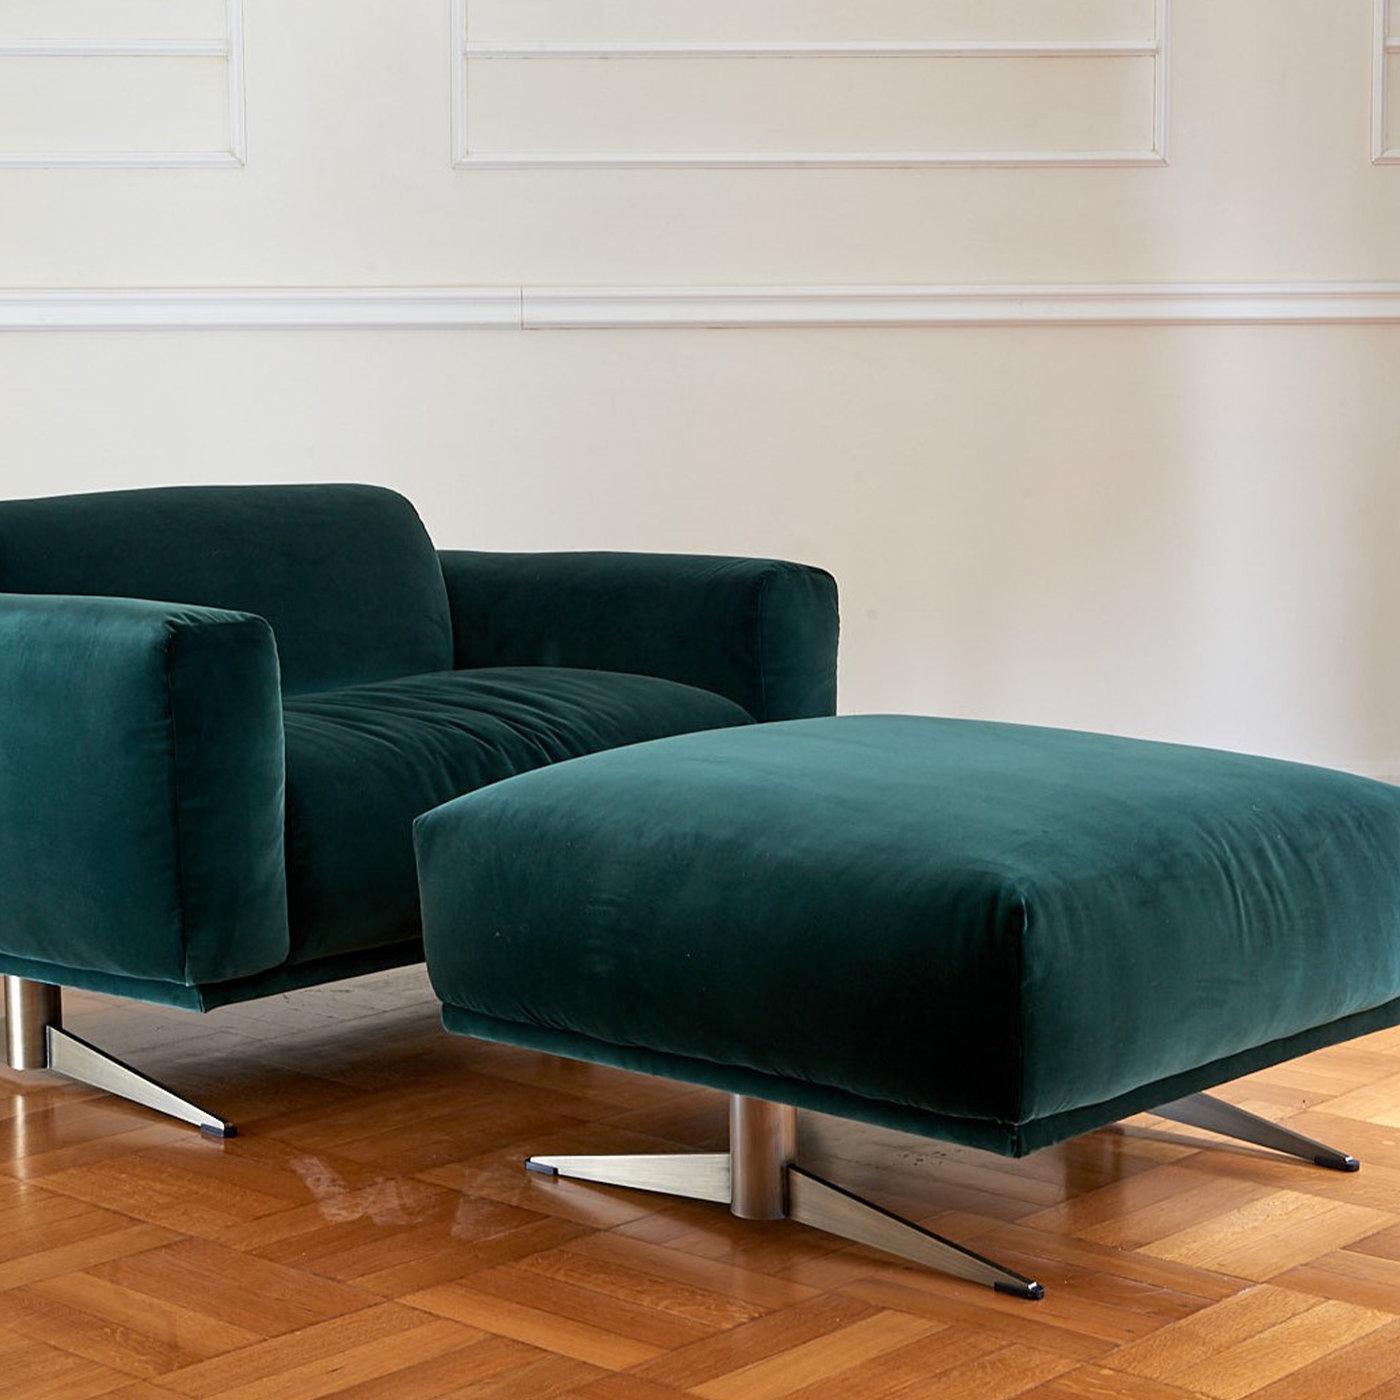 Sleek lines and lively flair define this modern-style square pouf, ideal as a footrest or additional seating in colorful, modern interiors. Raised on dynamic metal legs treated to obtain a galvanic finish, the plush seat features a wooden frame that